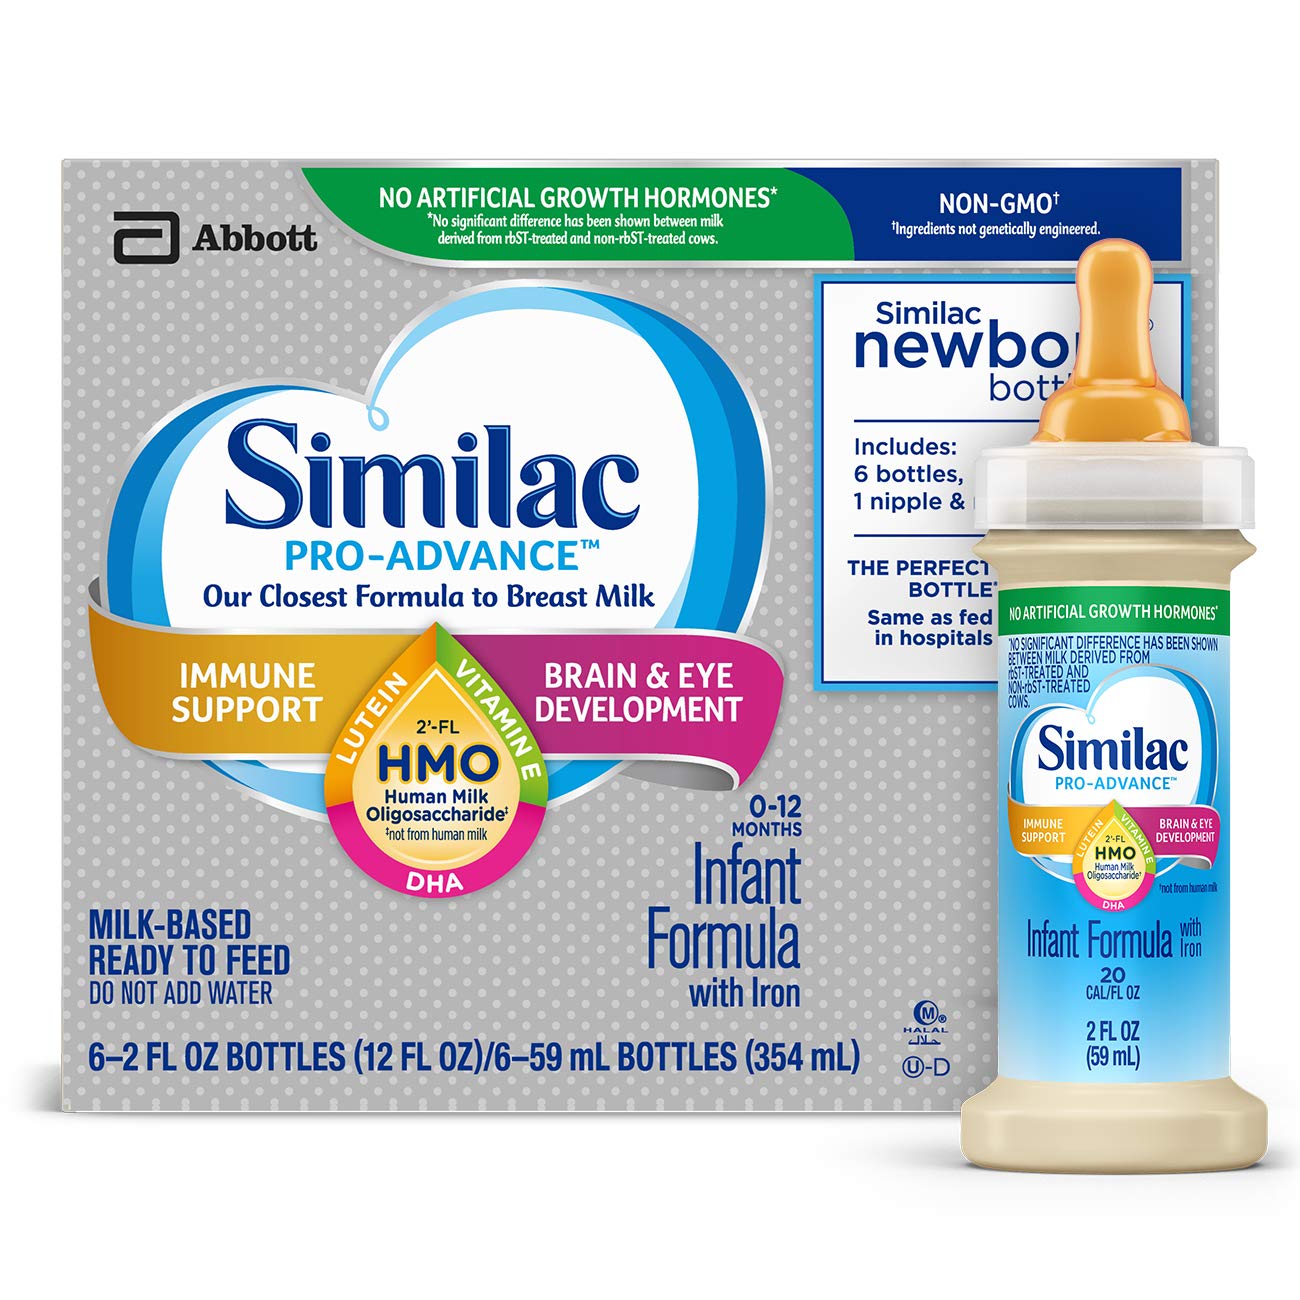 How To Store Similac Ready To Feed